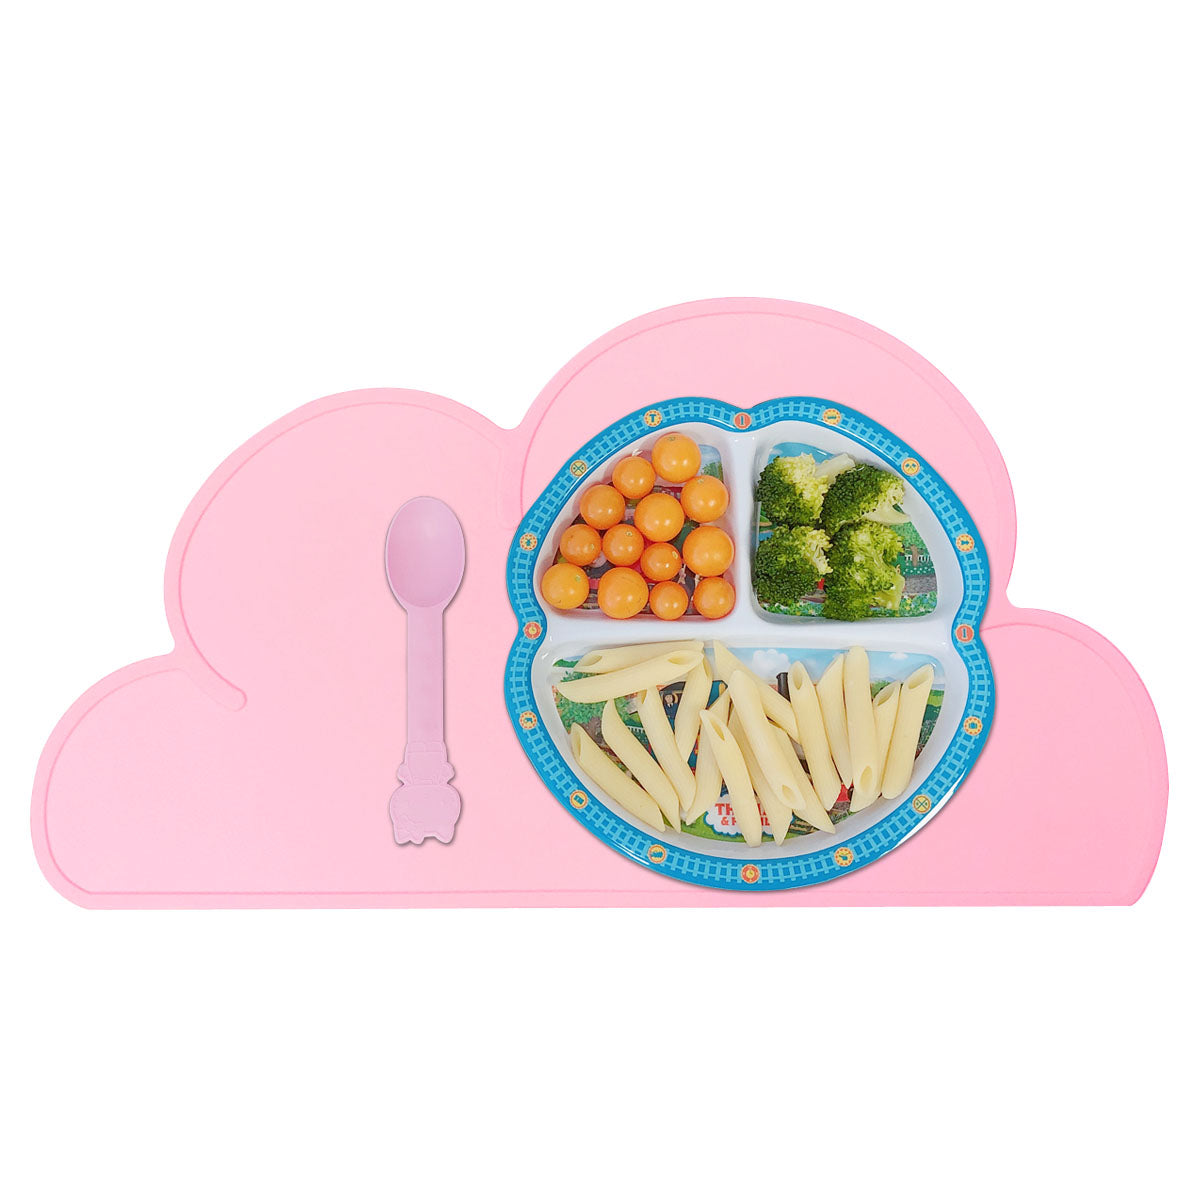 Wrapables® Children's Silicon Cloud Placemat Portable and Easy to Clean Food Mat